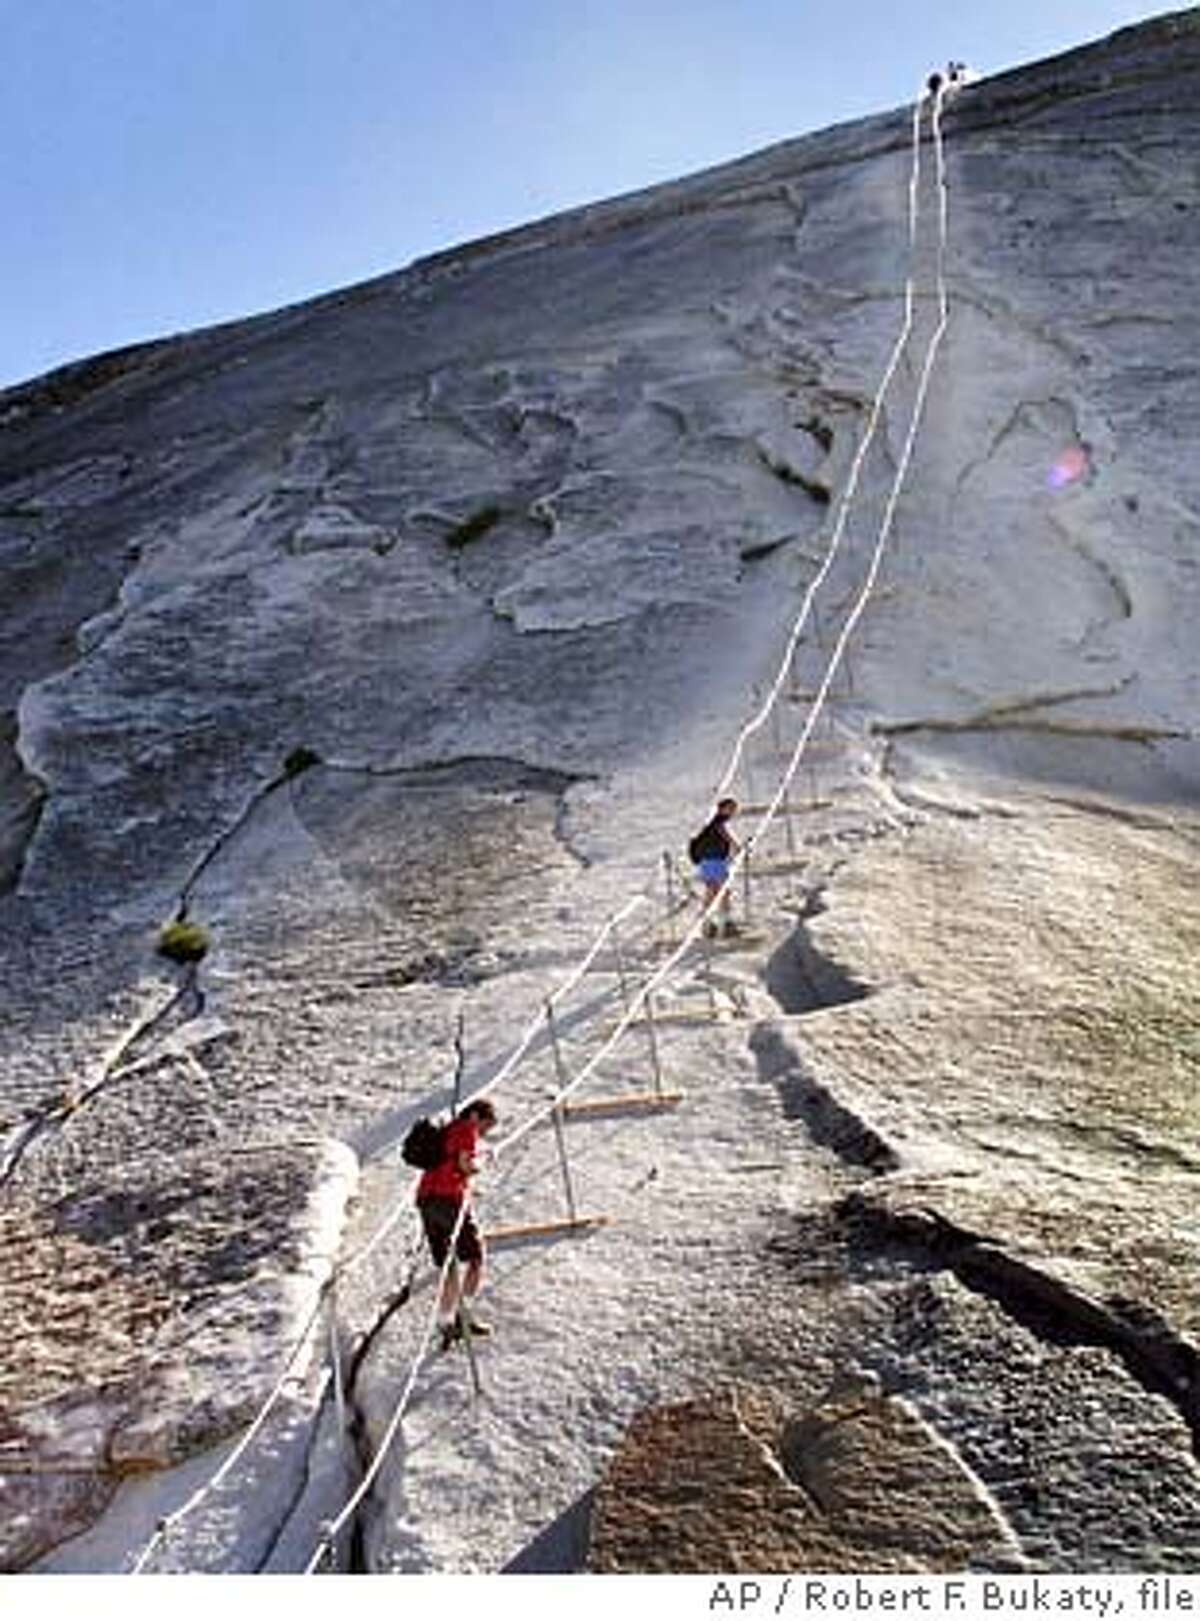 ** FOR IMMEDIATE RELEASE **Hikers decend the cable route after climbing to summit of Half Dome, June 6, 2004, in Yosemite National Park. In 1875 George Anderson first climbed this route by drilling holes in the granite and attaching ropes to pull himself to the summit. The park has maintained permanent cables here since 1919. (AP Photo/Robert F. Bukaty)